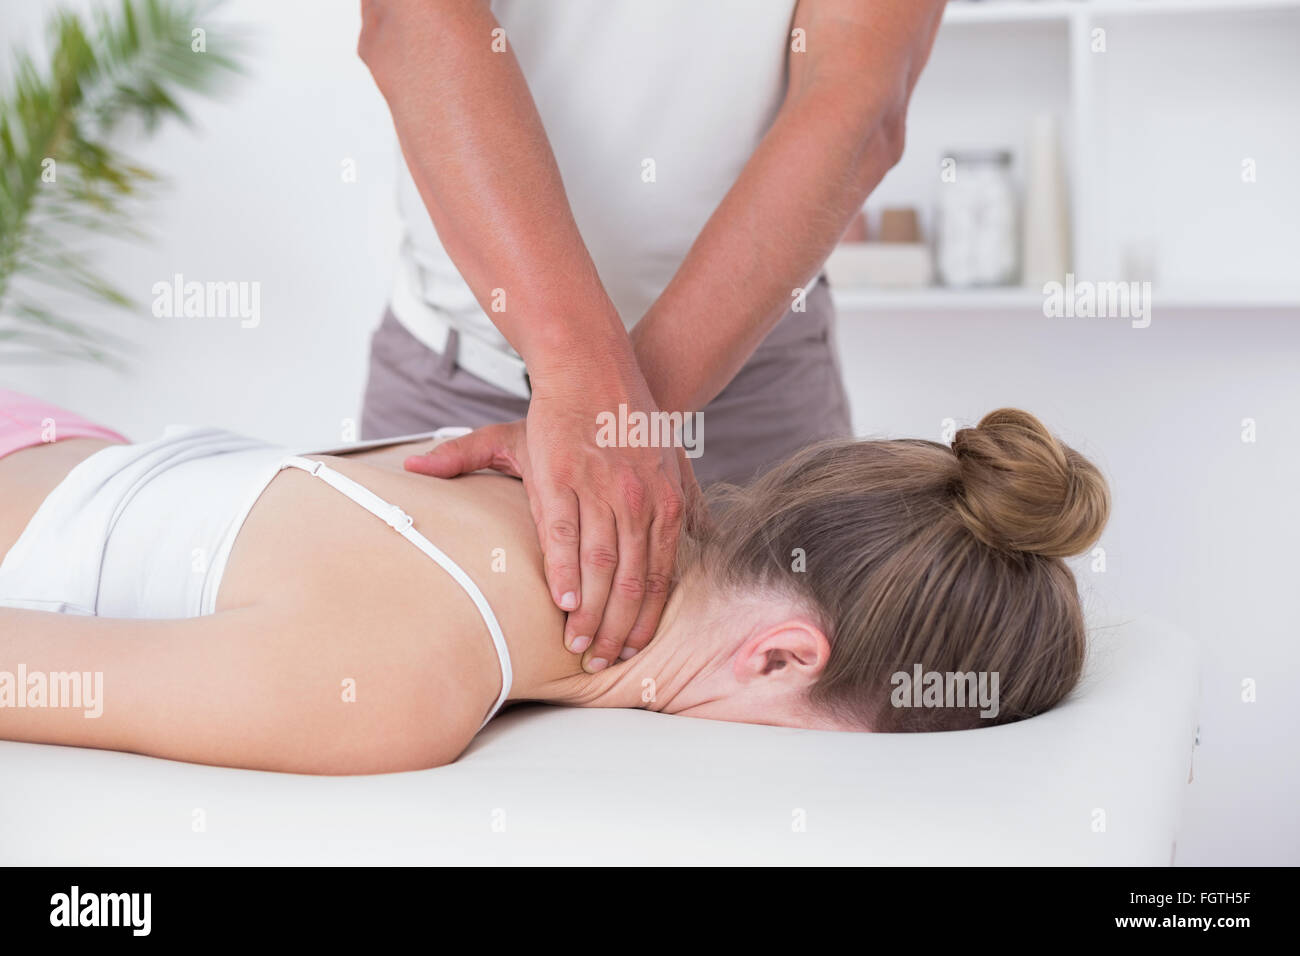 https://c8.alamy.com/comp/FGTH5F/physiotherapist-doing-neck-massage-to-his-patient-FGTH5F.jpg